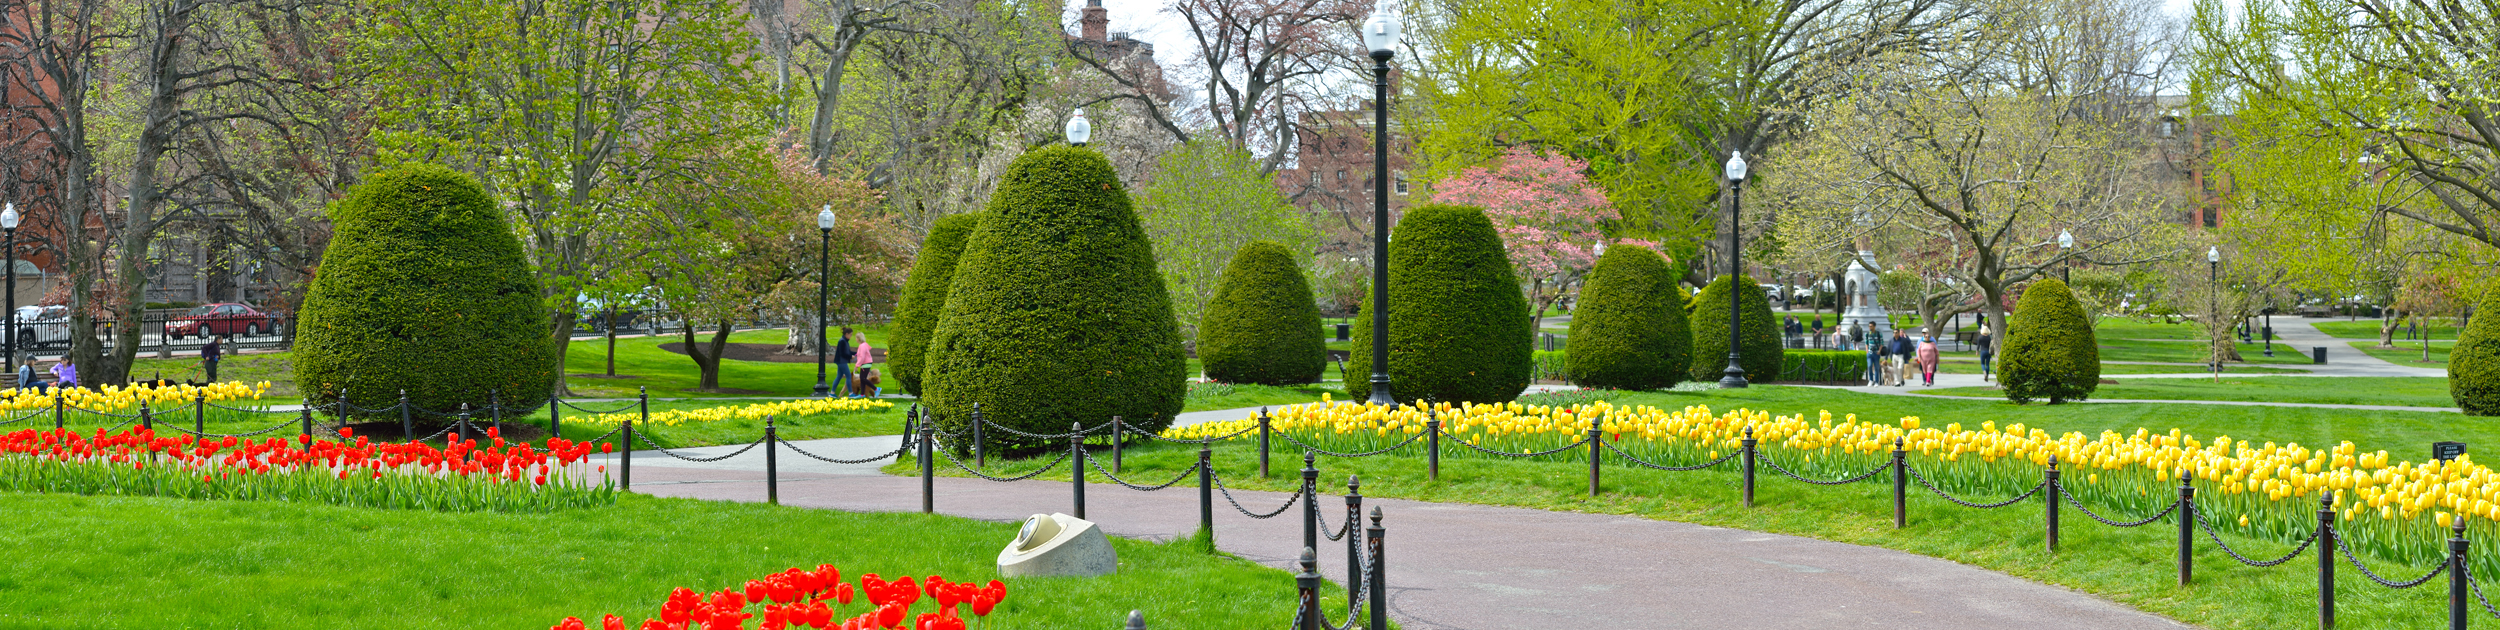 flower garden in Boston showing yellow and red flowers along a walkway